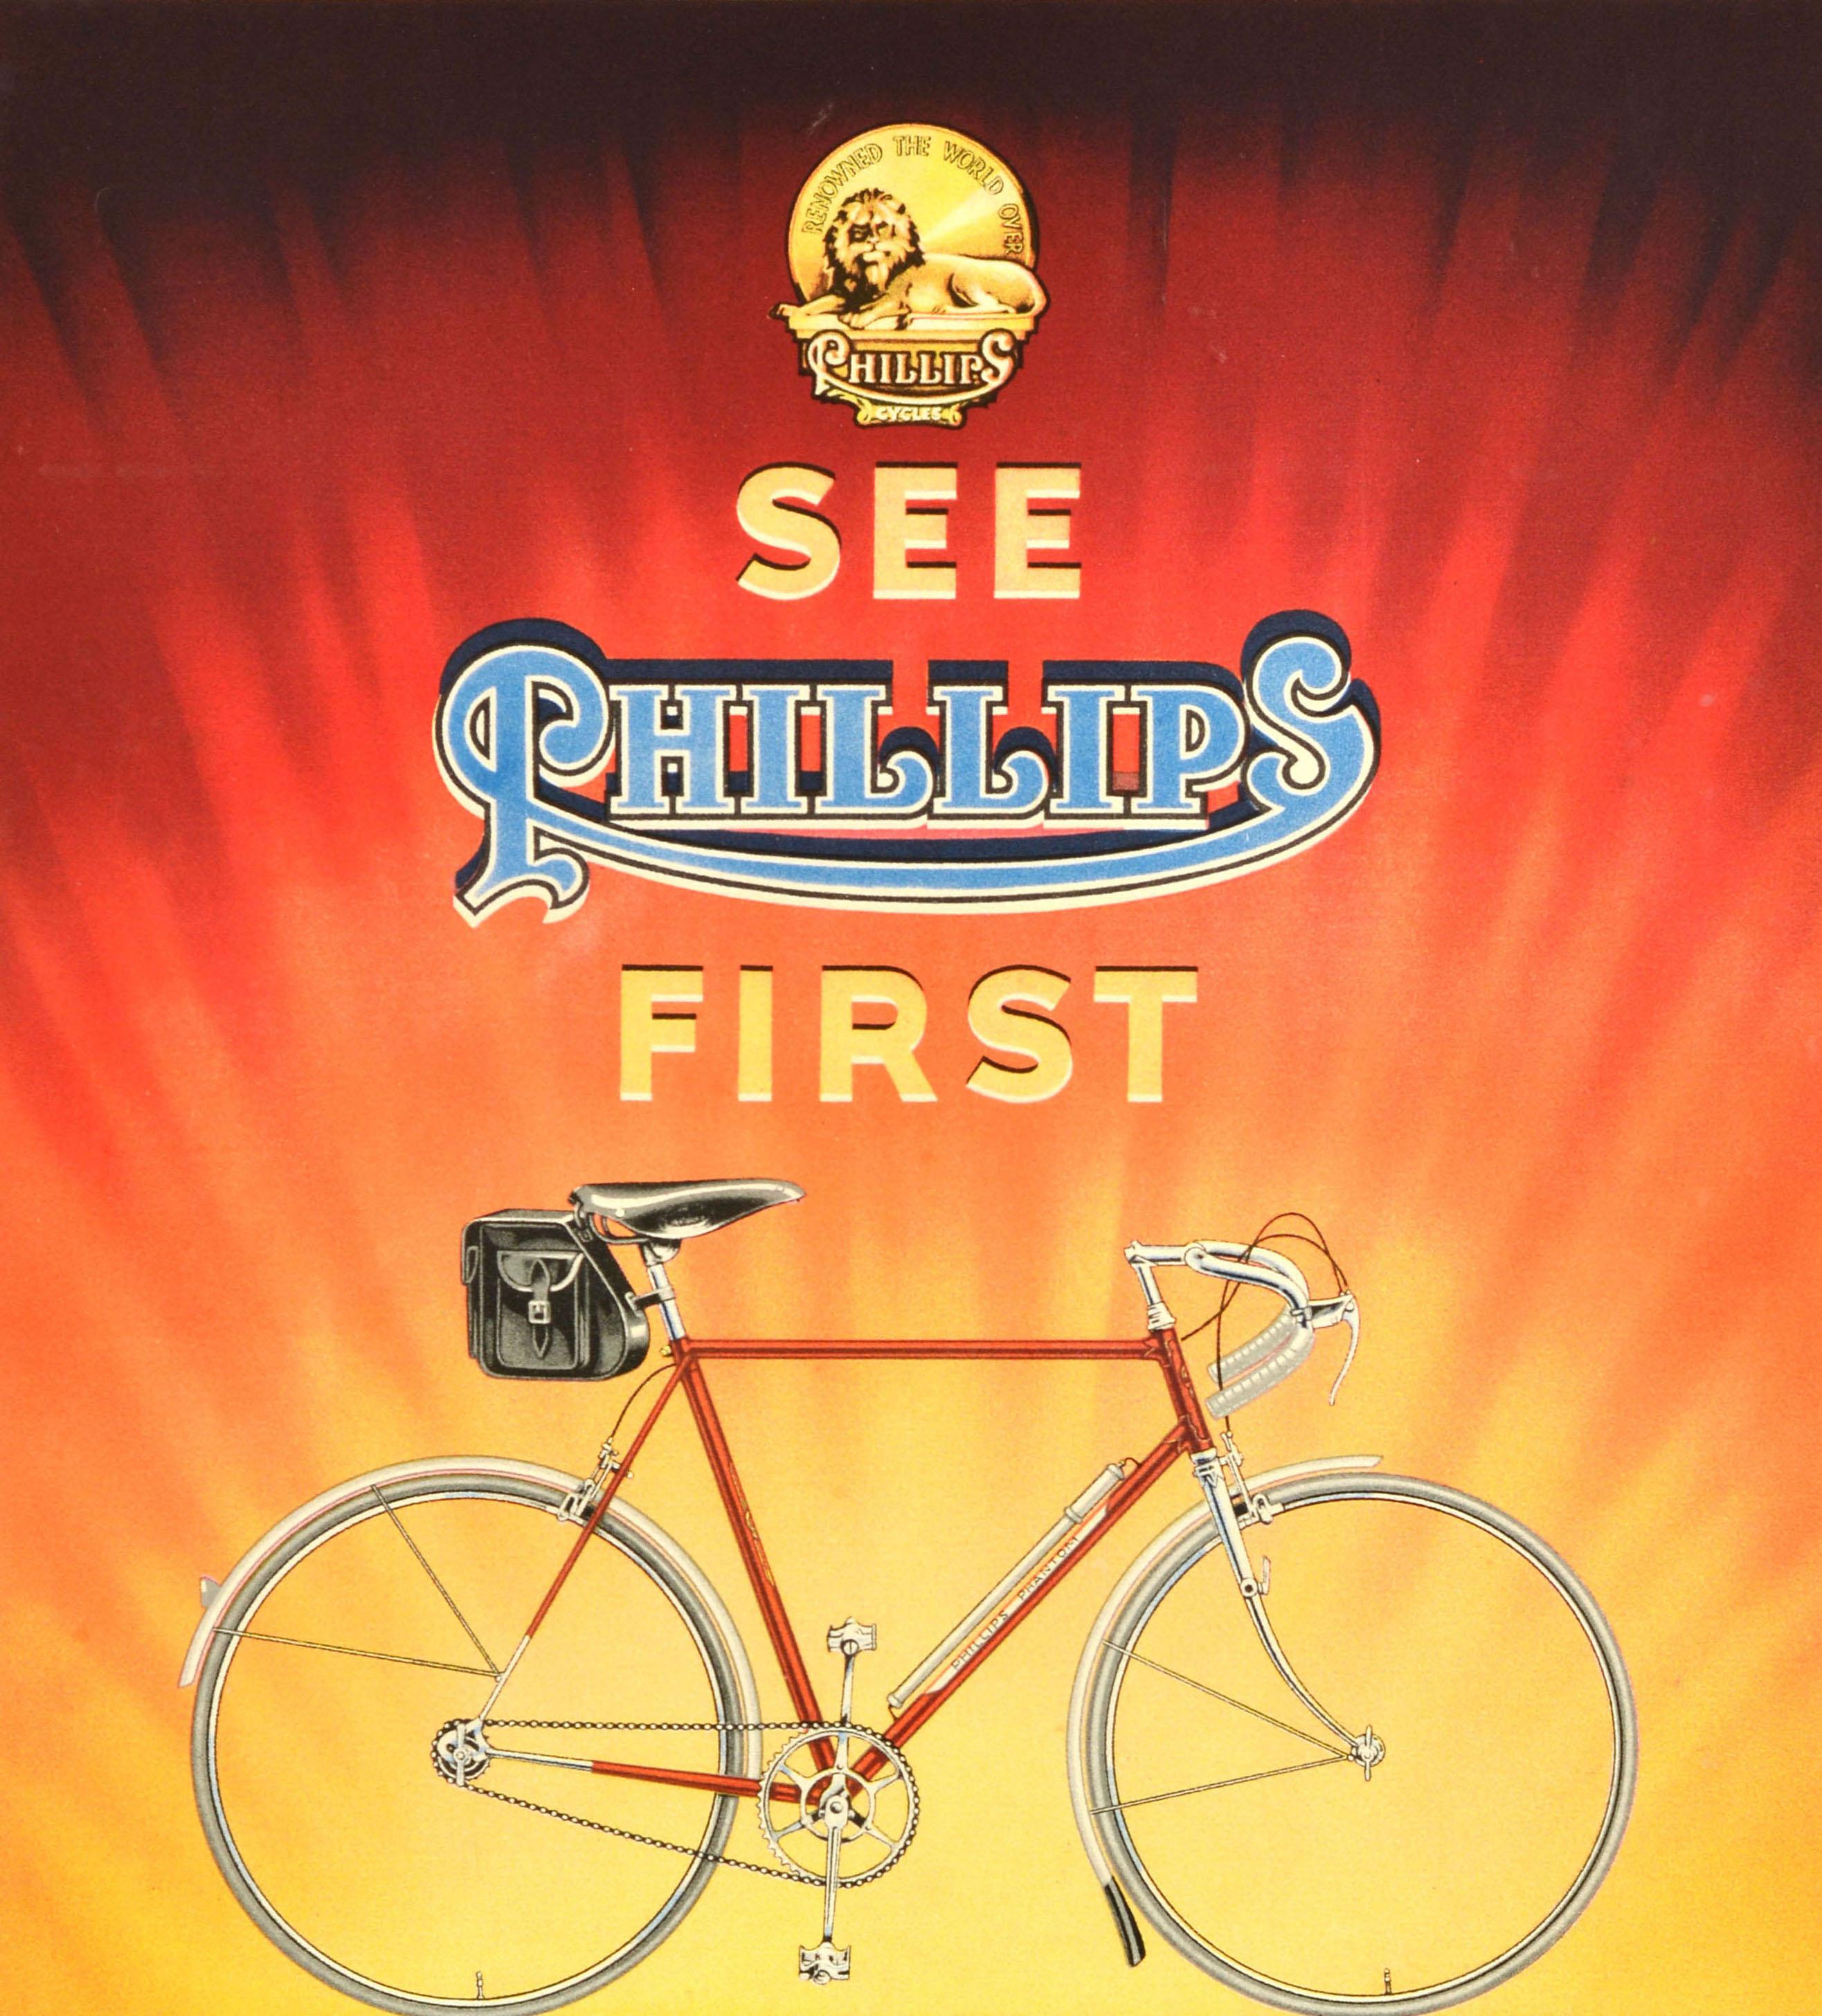 Original vintage bicycle advertising poster - See Phillips first A wonderful range of sports machines ask here for free illustrated catalogue - featuring an image of a new sport bike lit up by the sun shining in yellow, orange and red in the